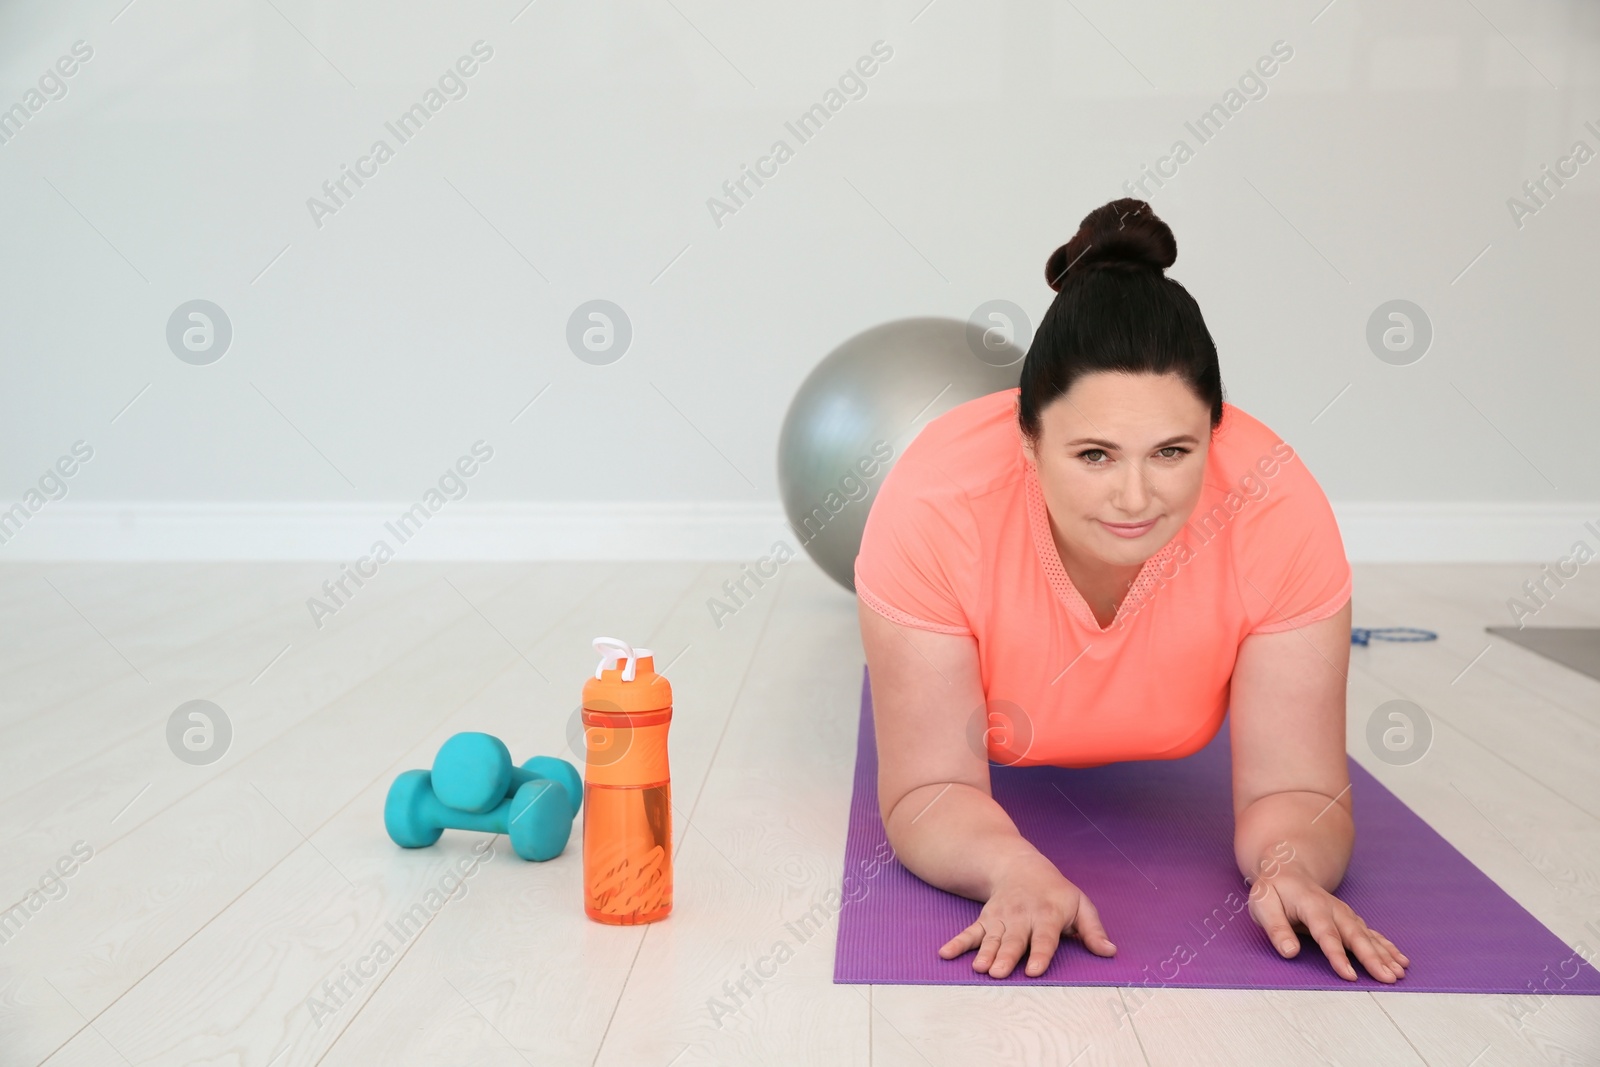 Photo of Overweight woman doing plank exercise on mat in gym